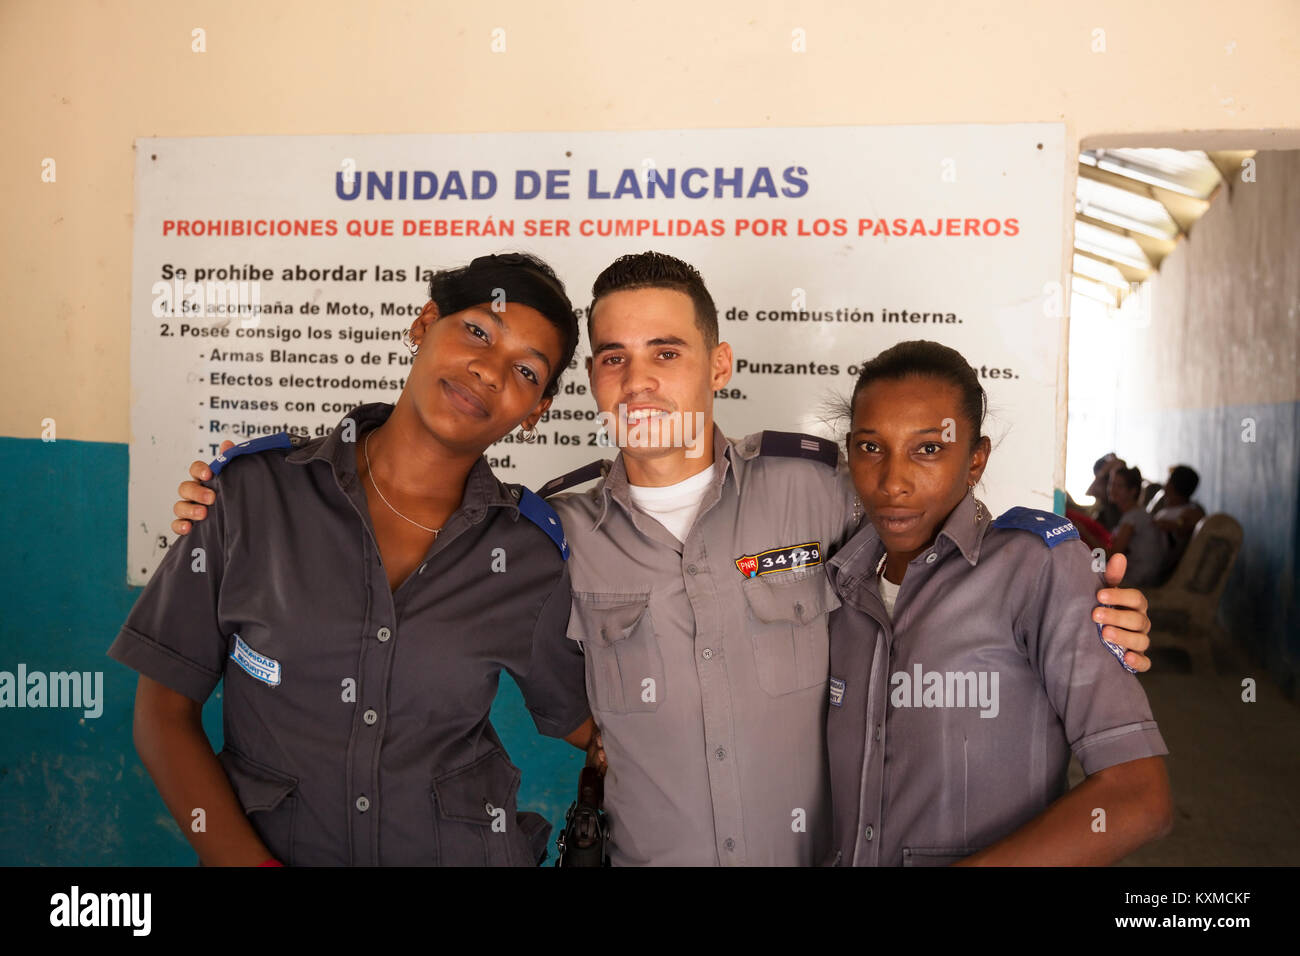 A Cuban police officer and two security guards in Havana, Cuba. Stock Photo